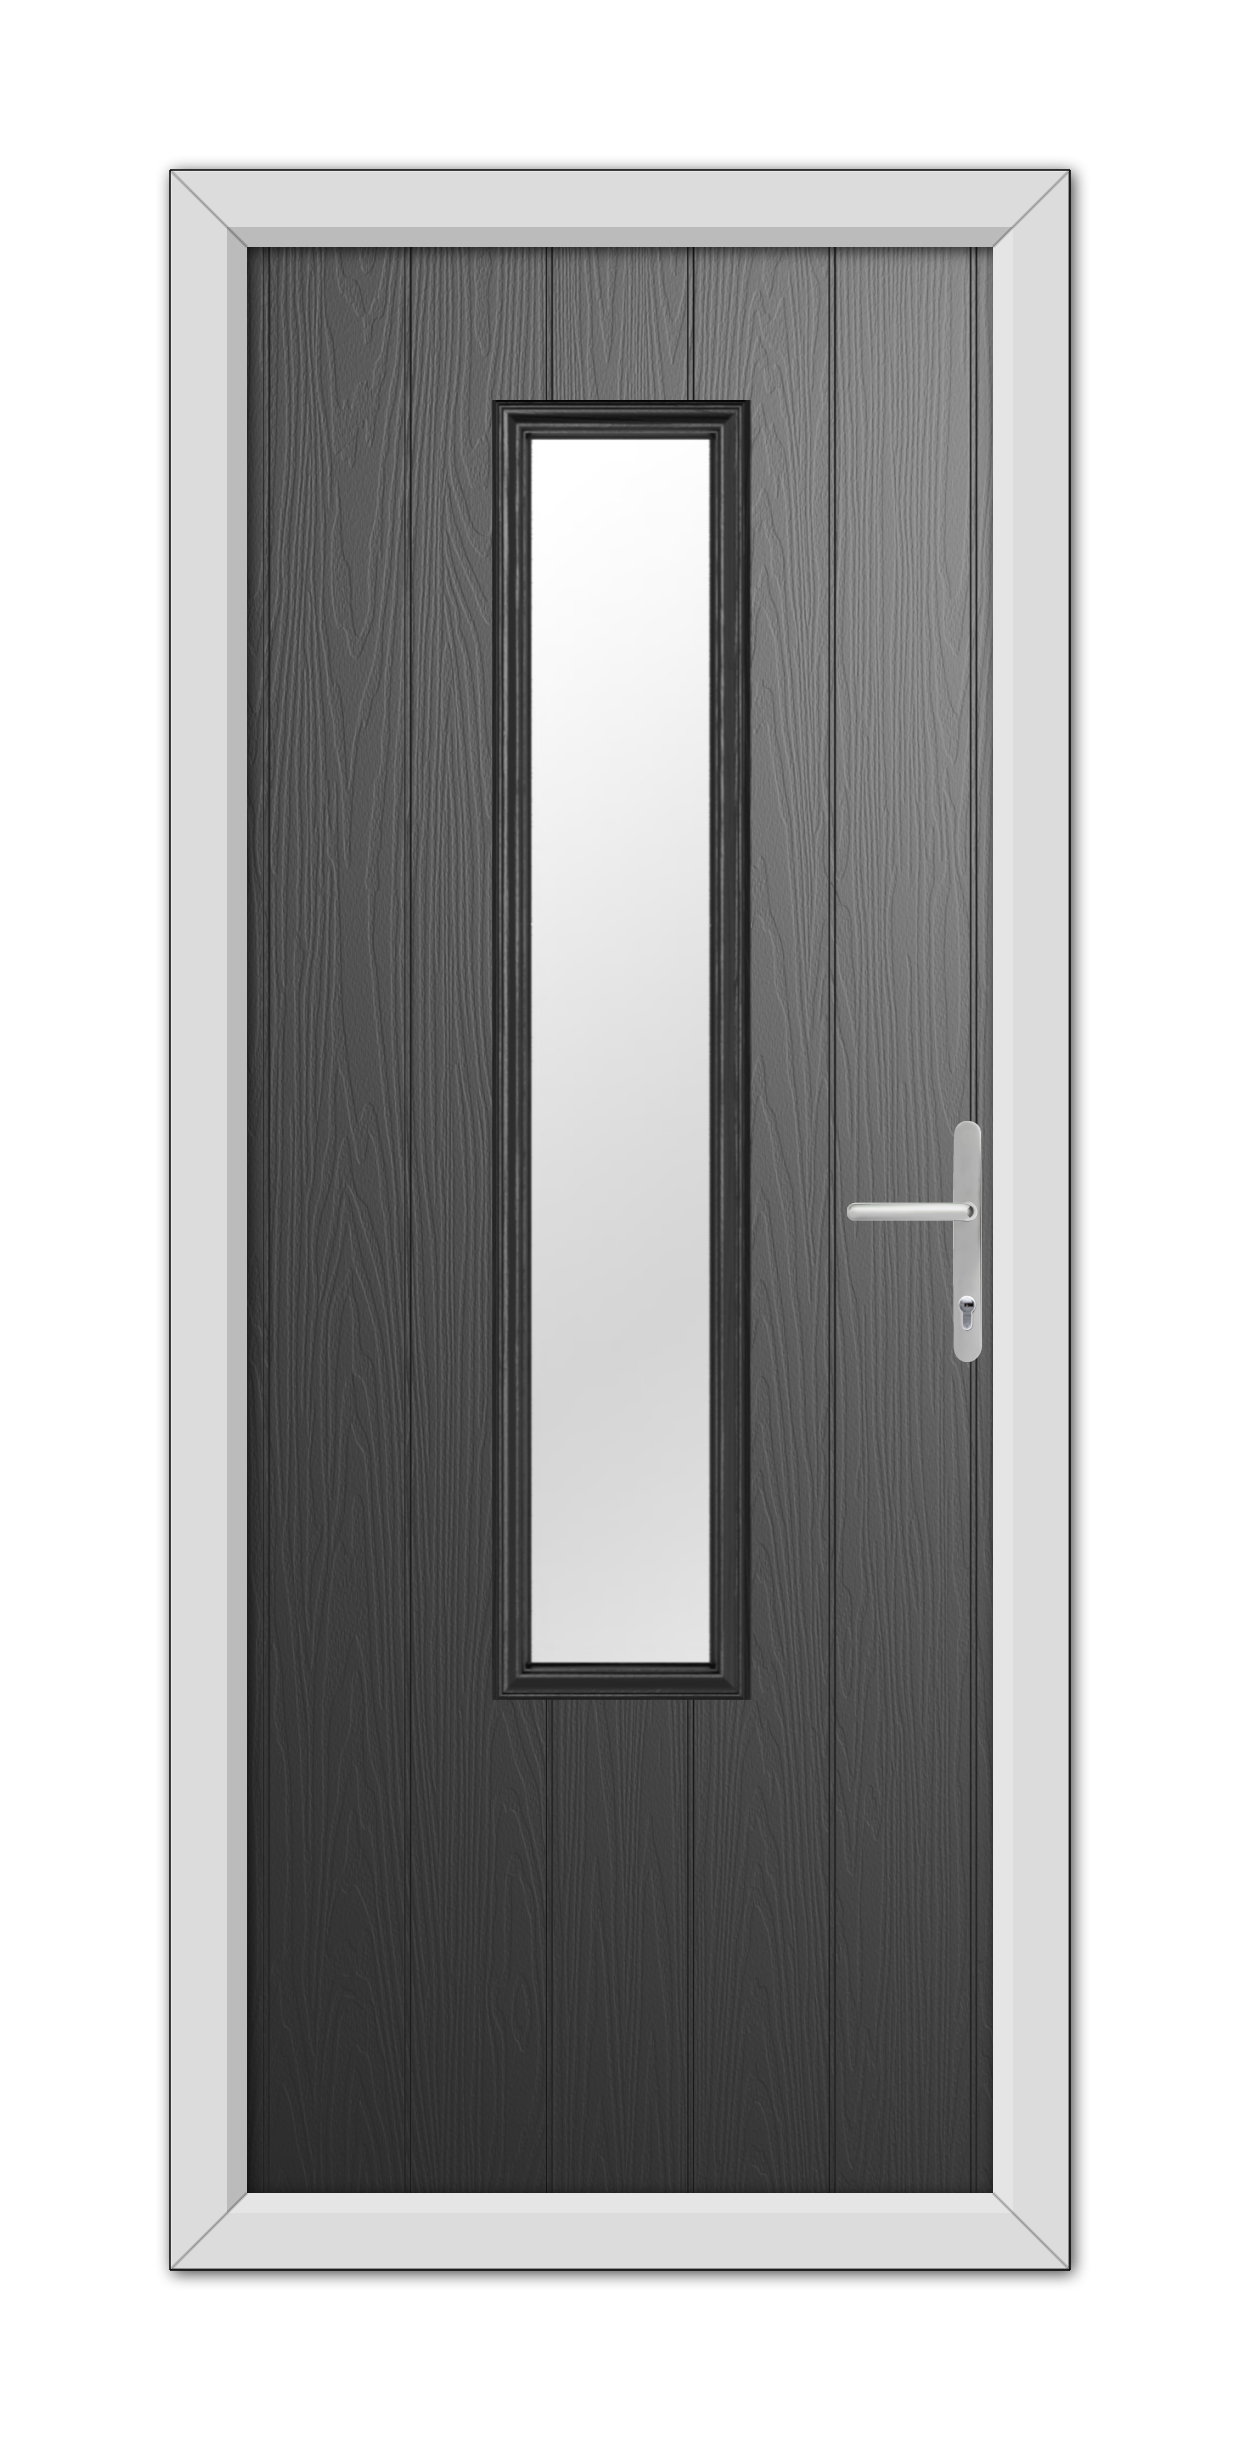 A modern Black Abercorn Composite Door 48mm Timber Core with a vertical rectangular glass pane, featuring a metallic handle and a white frame.